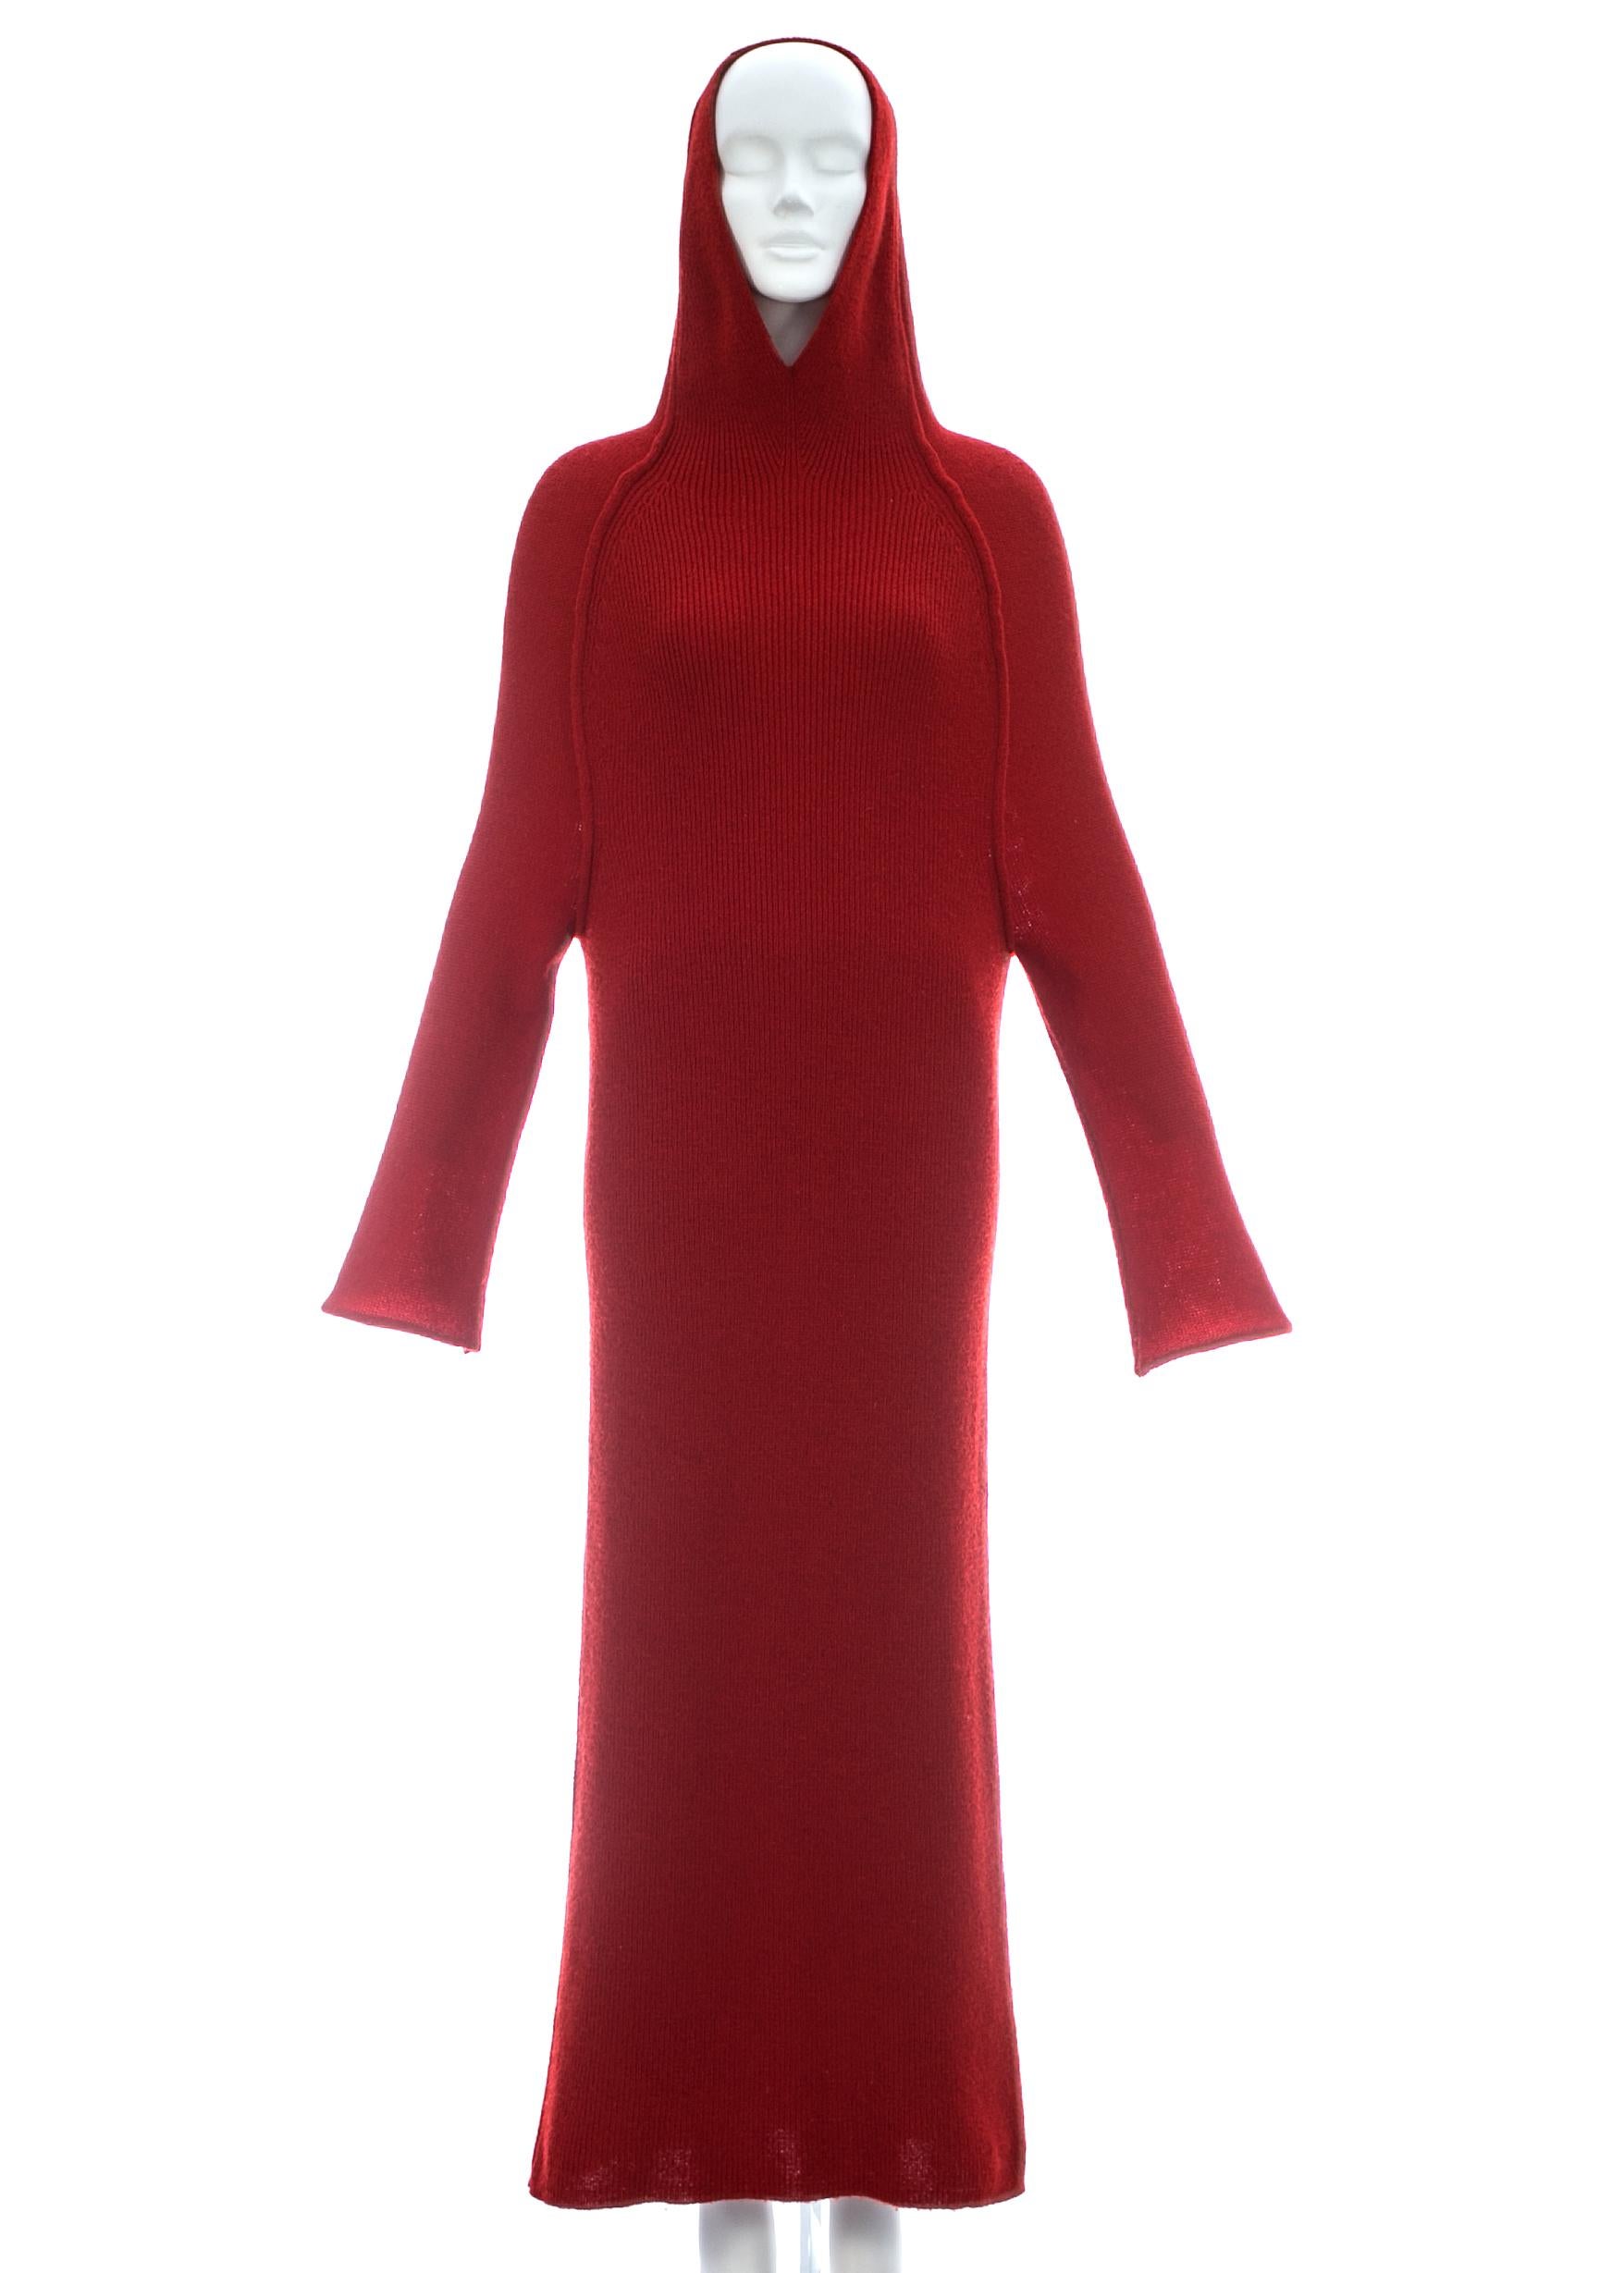 Red Yohji Yamamoto red wool hooded knitted maxi dress, c. 1990s For Sale